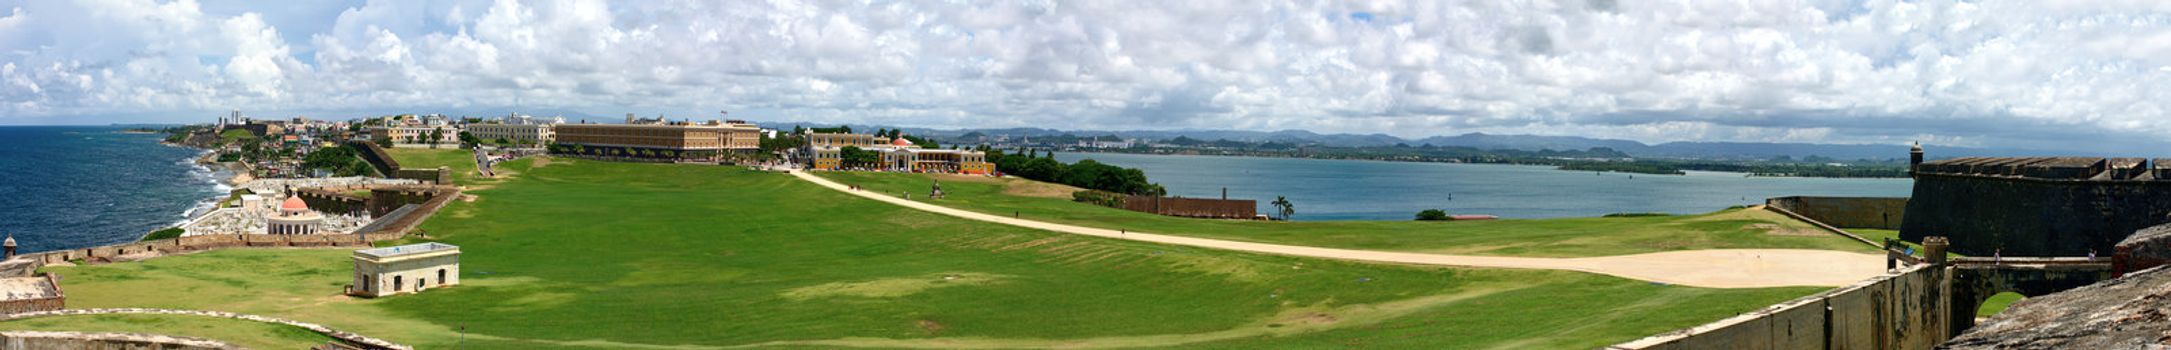 Wide angle panoramic view of Old San Juan Puerto Rico from El Morro fortification.